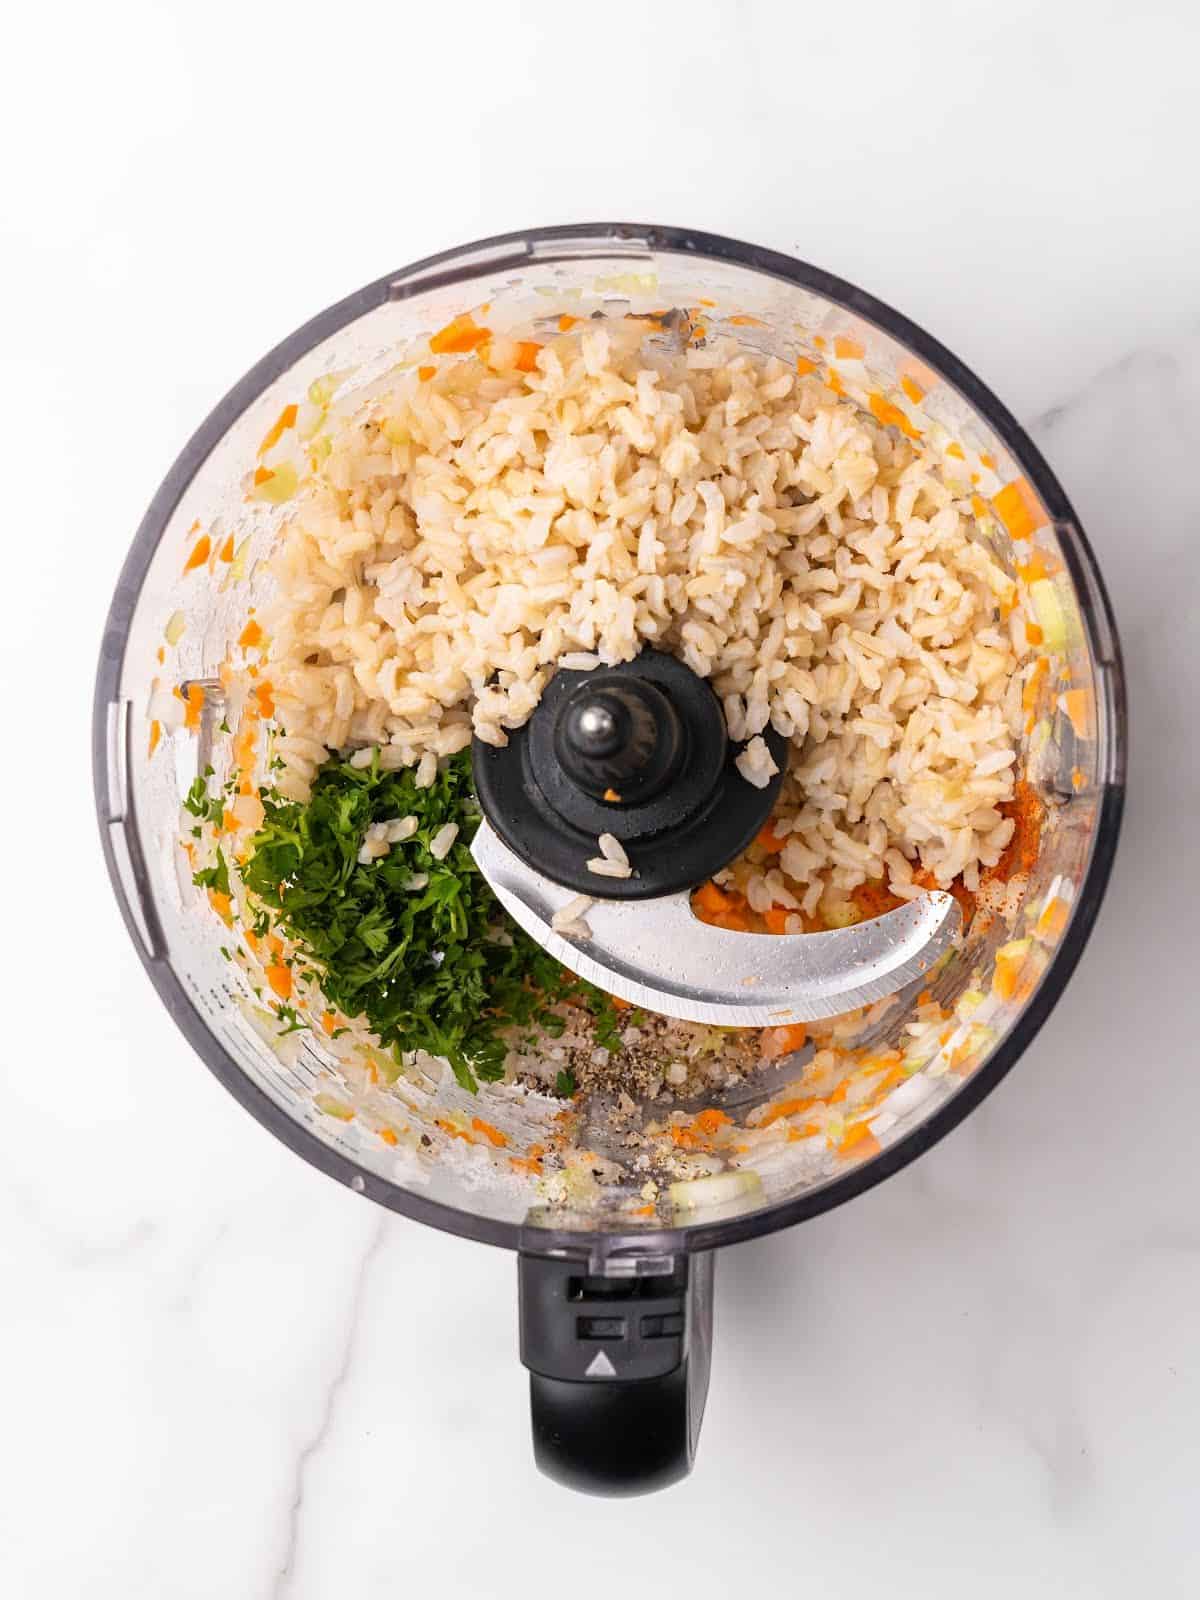 Rice and parsley added to food processor bowl with chopped vegetables. White marble surface. 